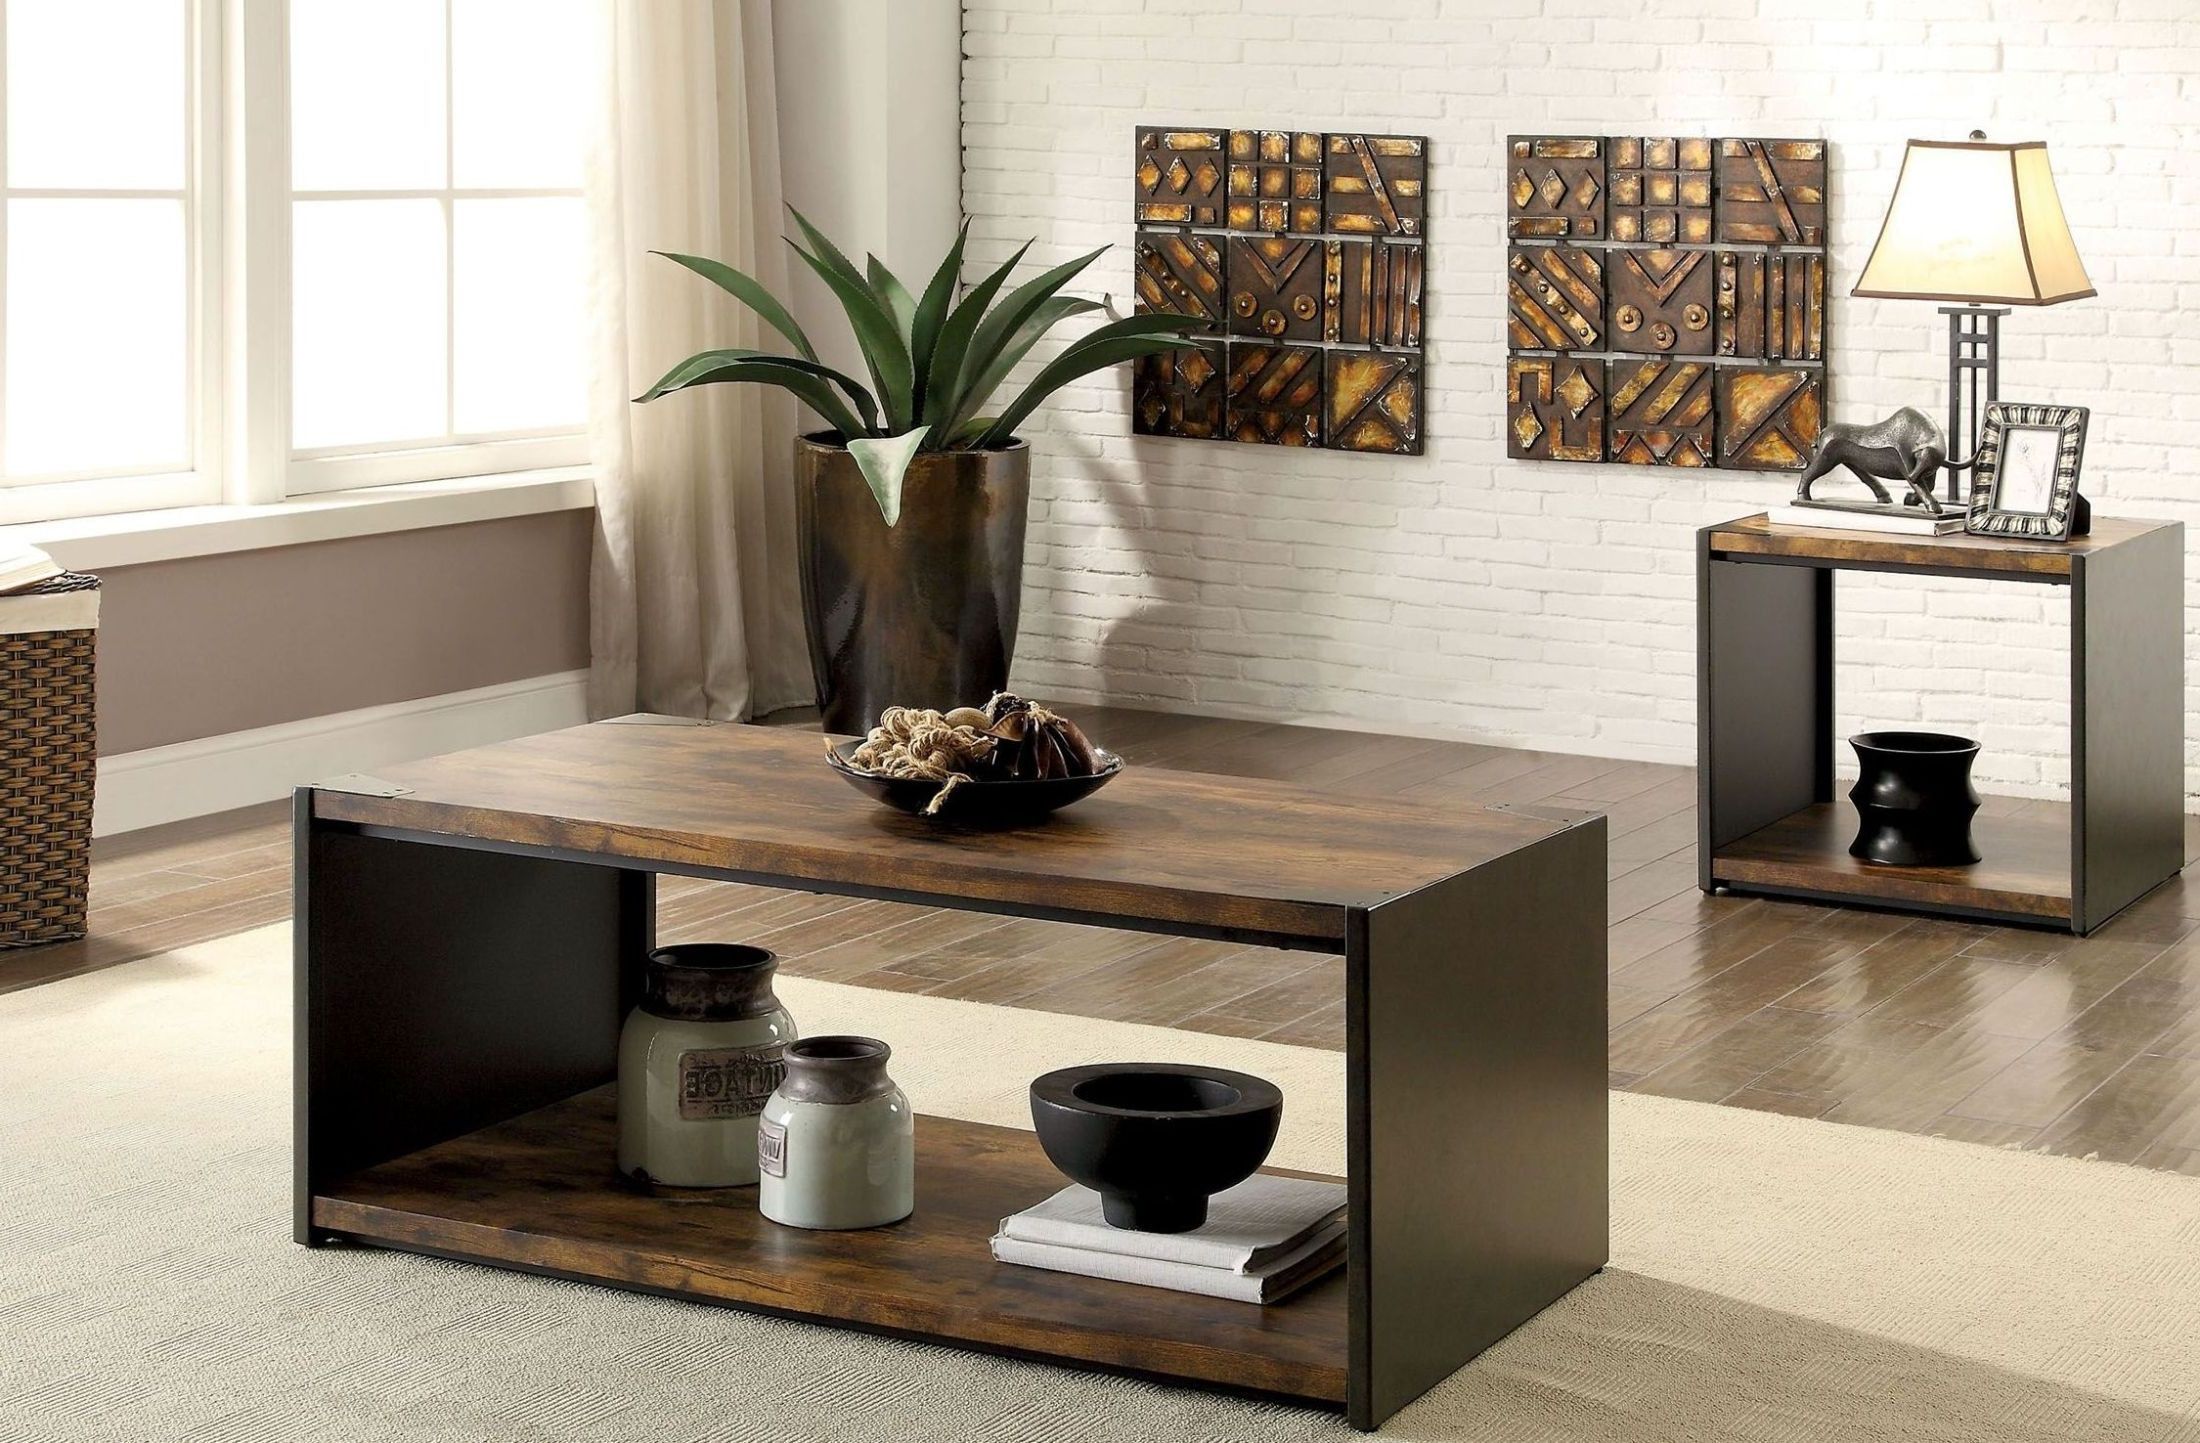 Reina Matte Black Occasional Table Set From Furniture Of Within Latest Square Matte Black Coffee Tables (View 12 of 20)